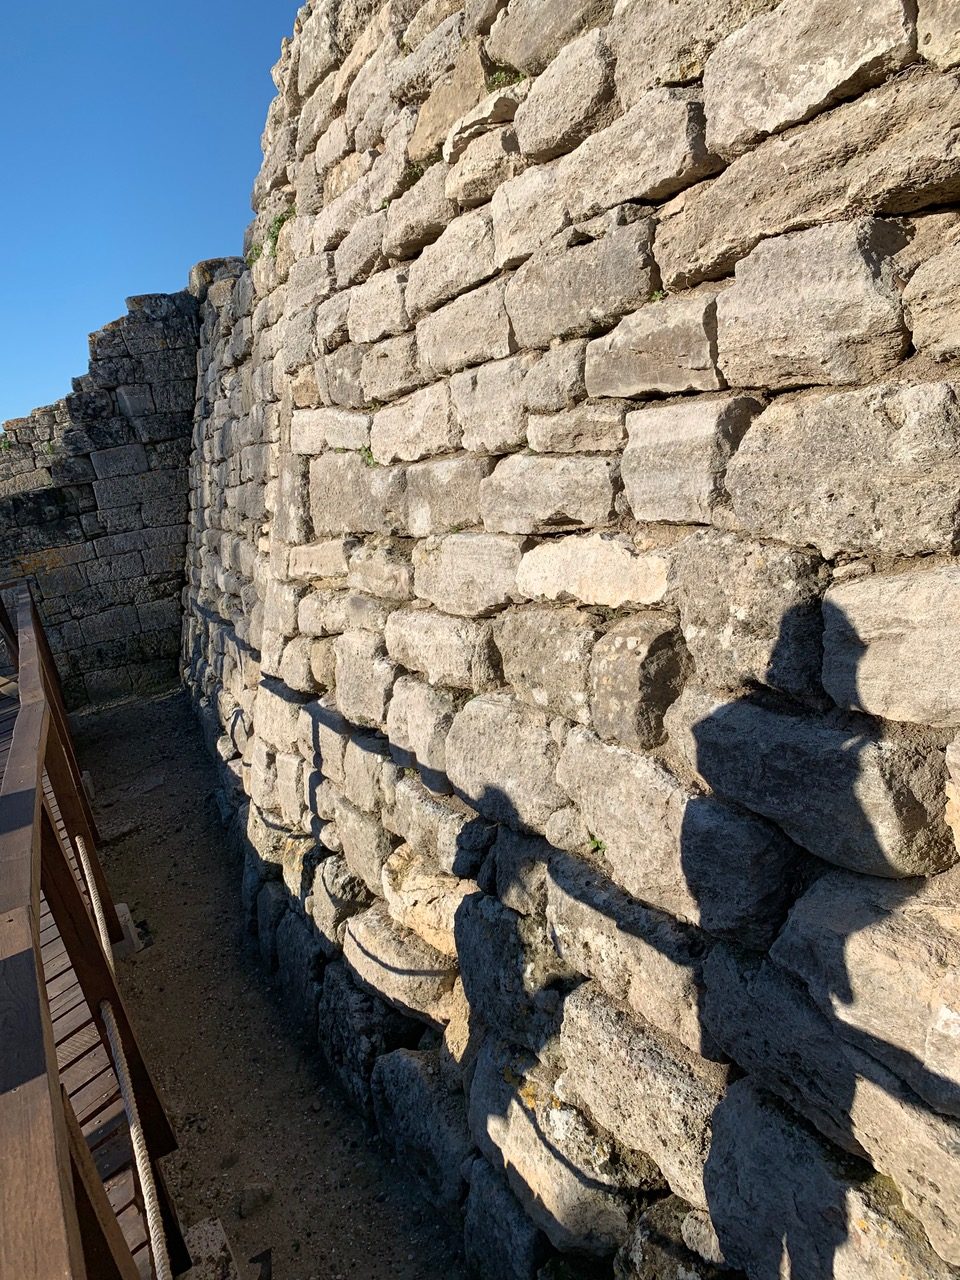 A wall with shadowy figures